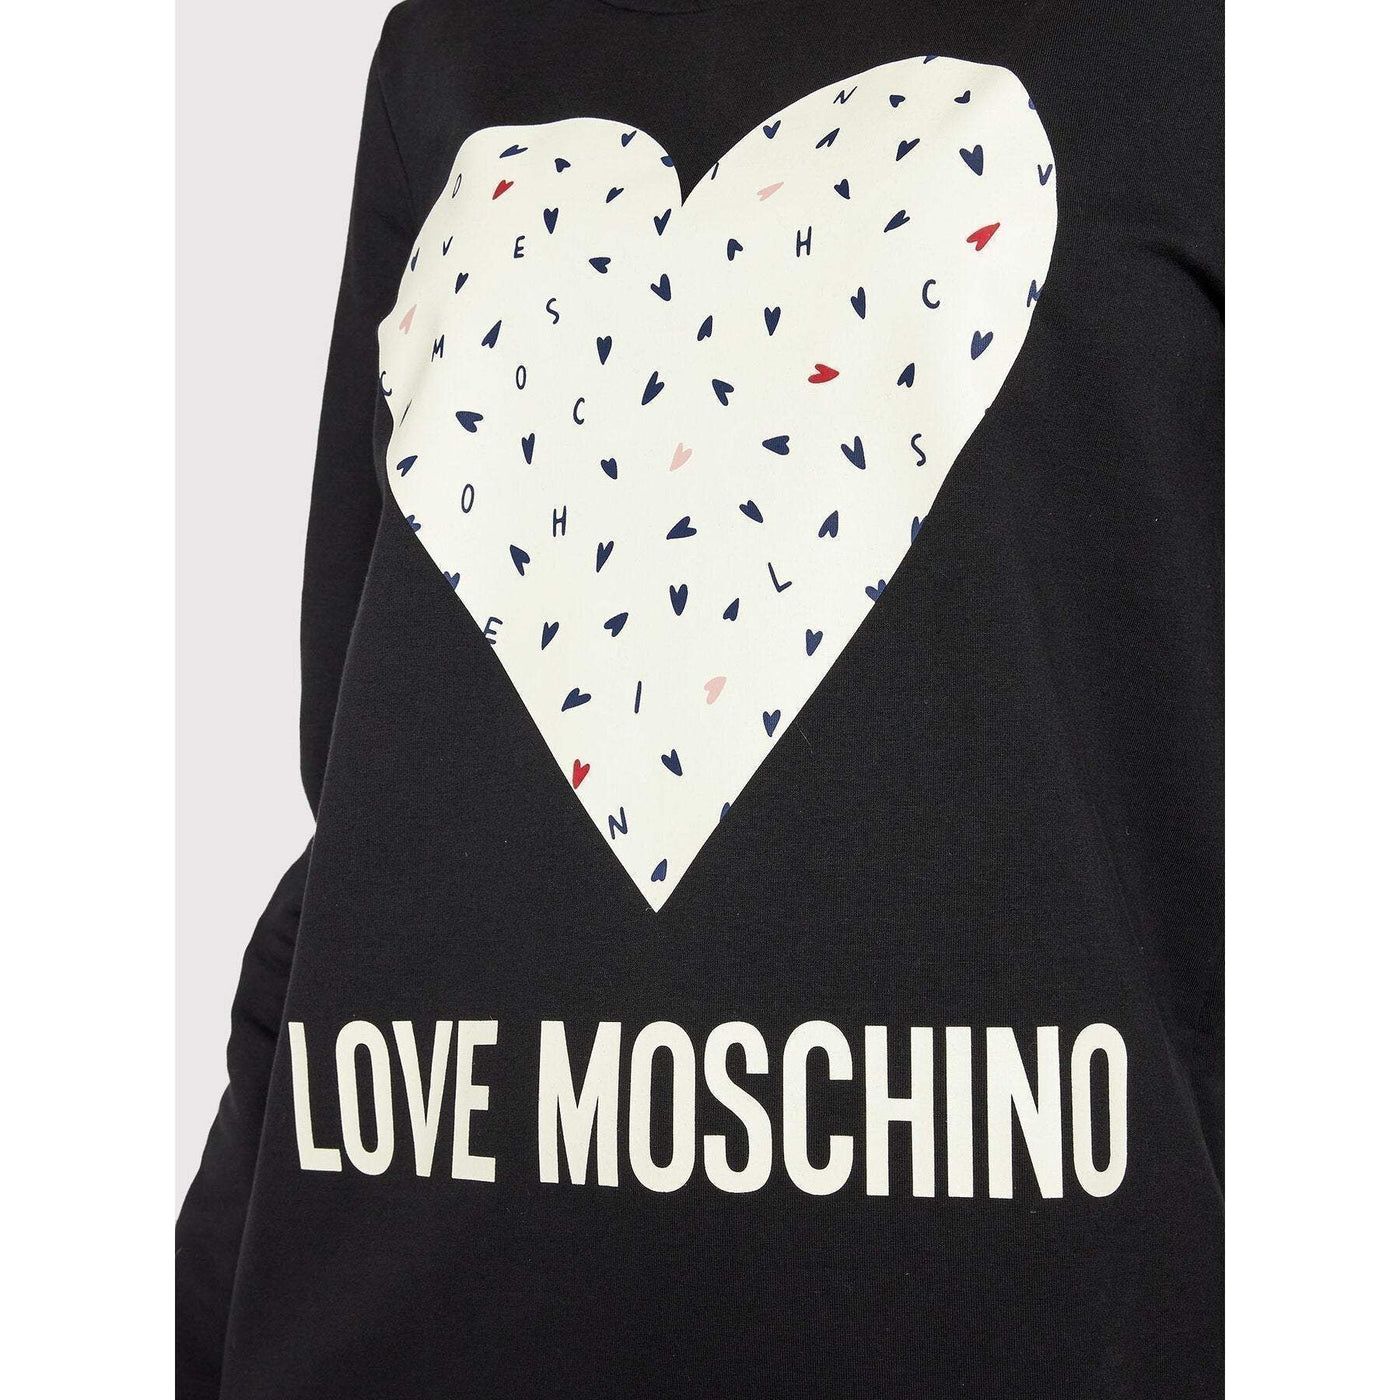 Love Moschino brand design Dress #women, Black, Dresses - Women - Clothing, feed-agegroup-adult, feed-color-Black, feed-gender-female, IT40|S, IT42|M, IT44|L, IT46 | L, Love Moschino at SEYMAYKA